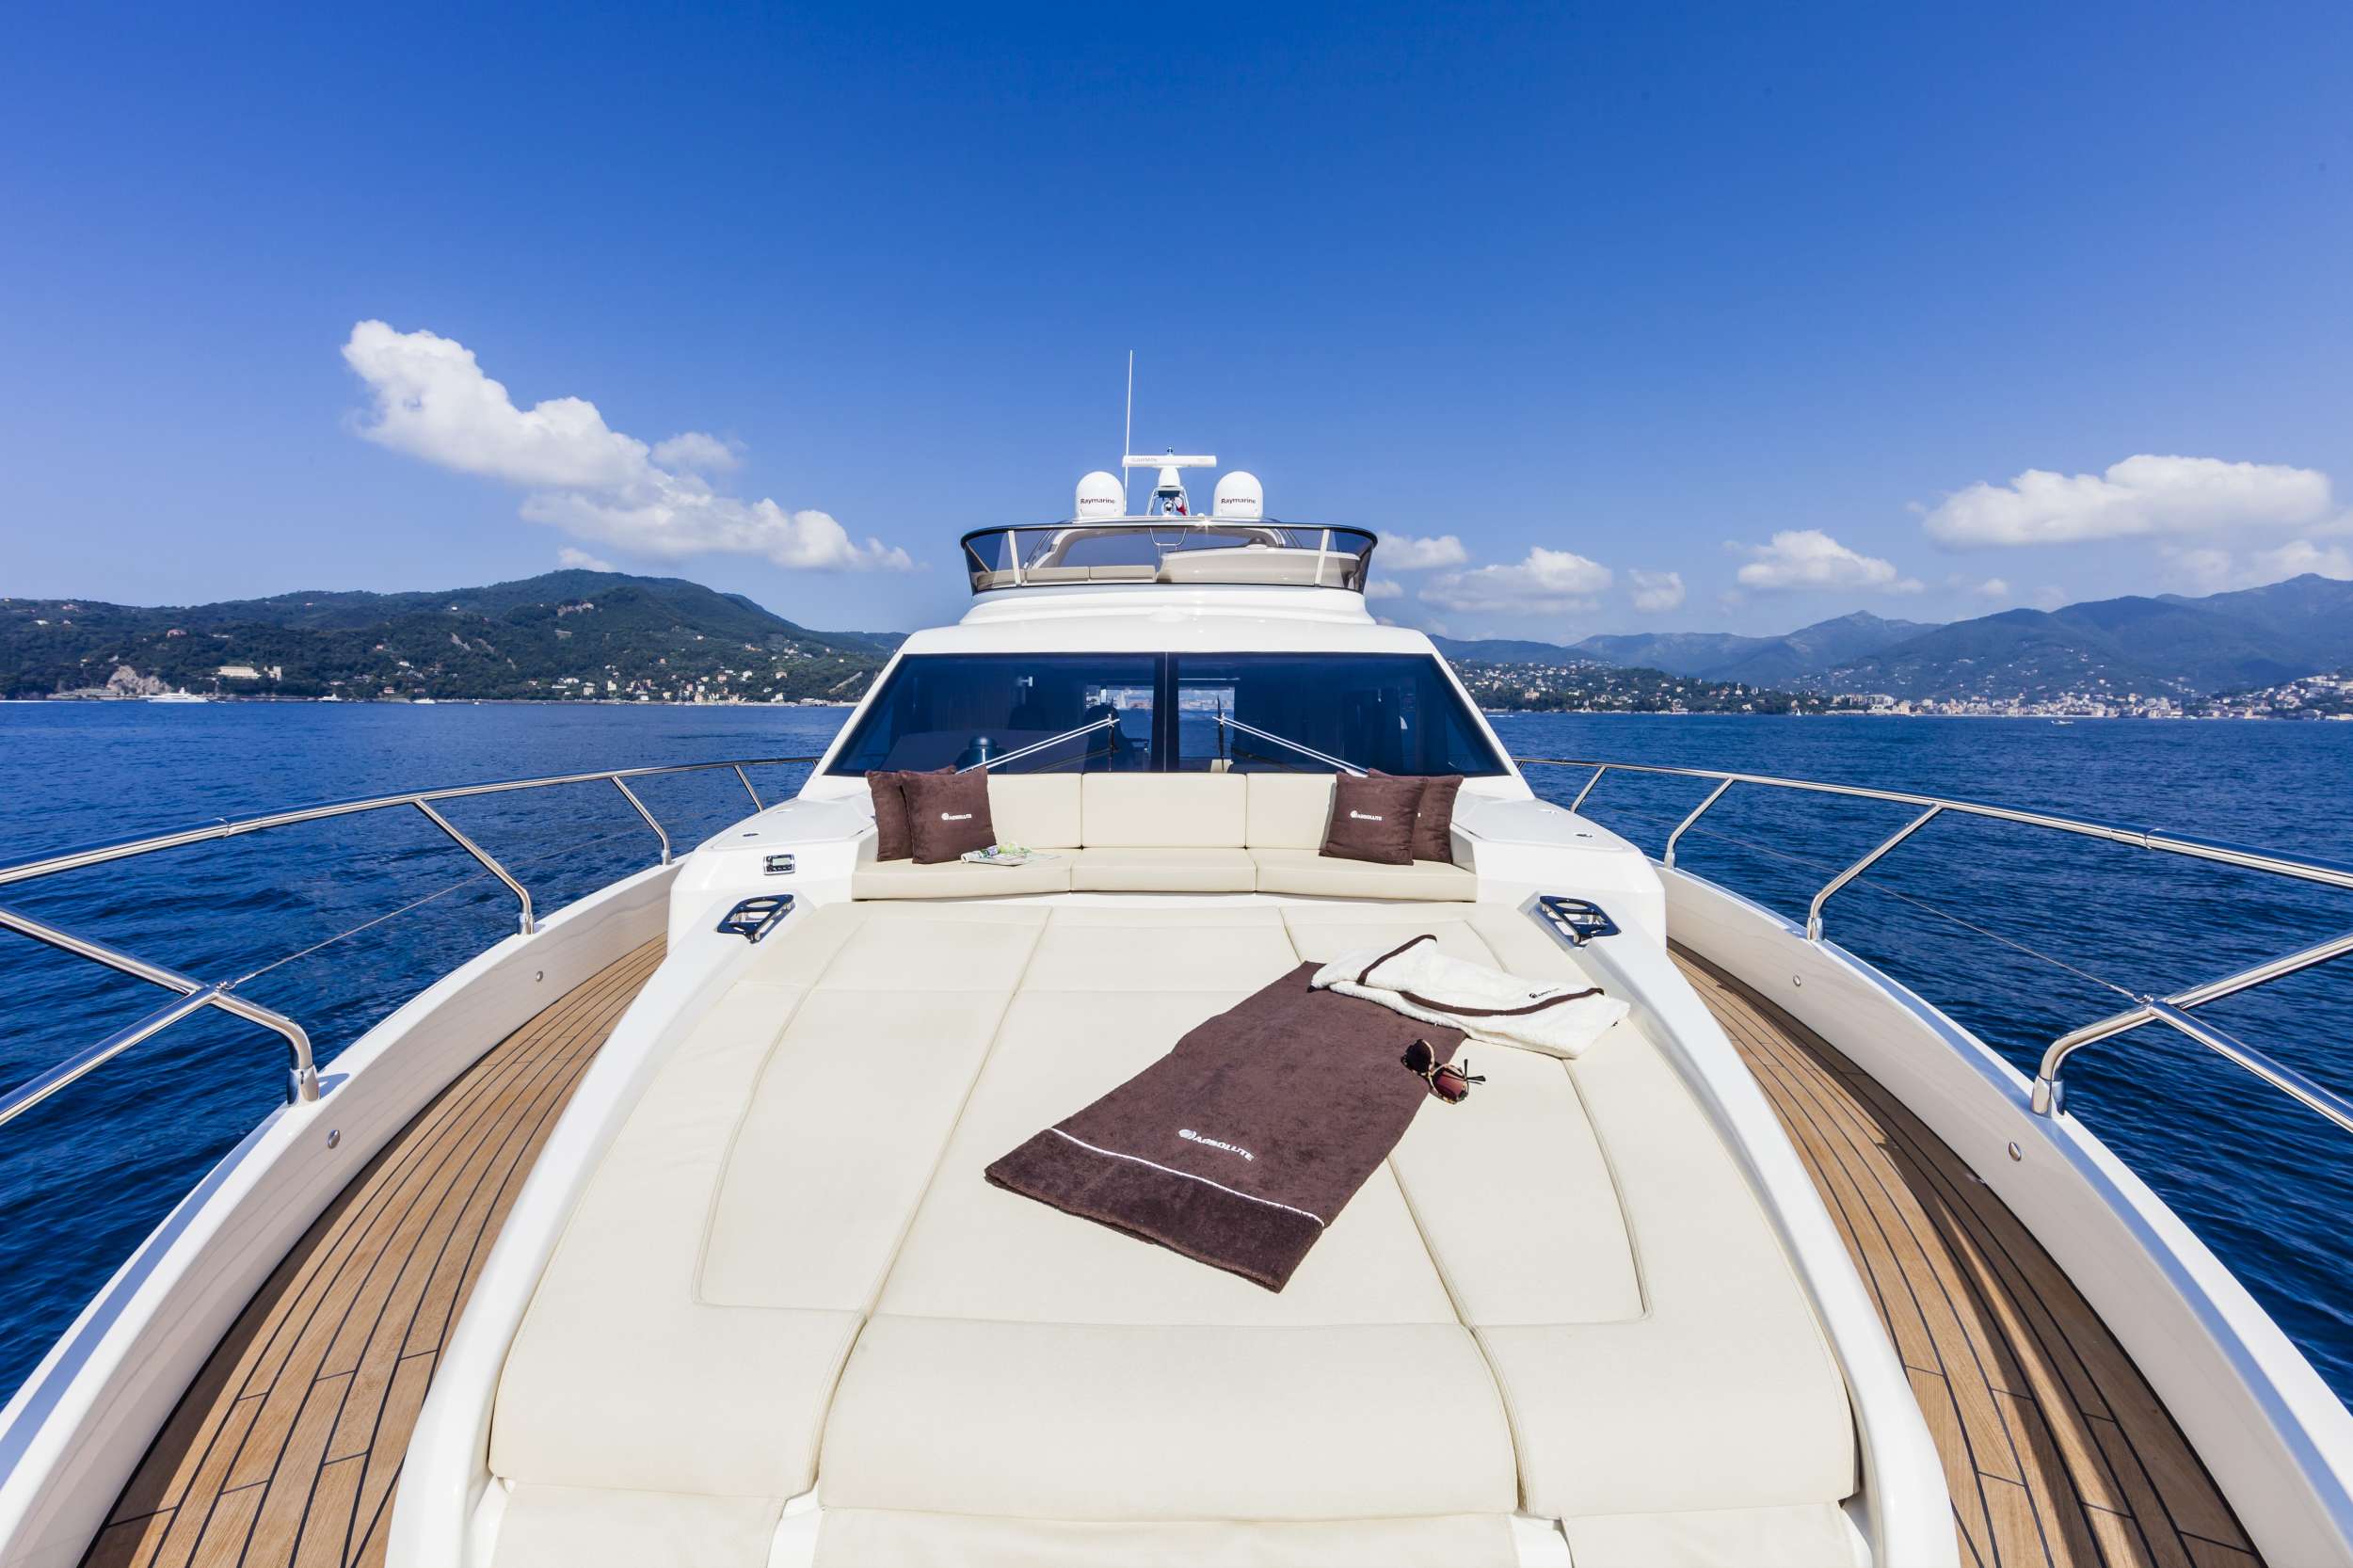 ABSOLUTE - Yacht Charter Cannes & Boat hire in Fr. Riviera, Corsica & Sardinia 4